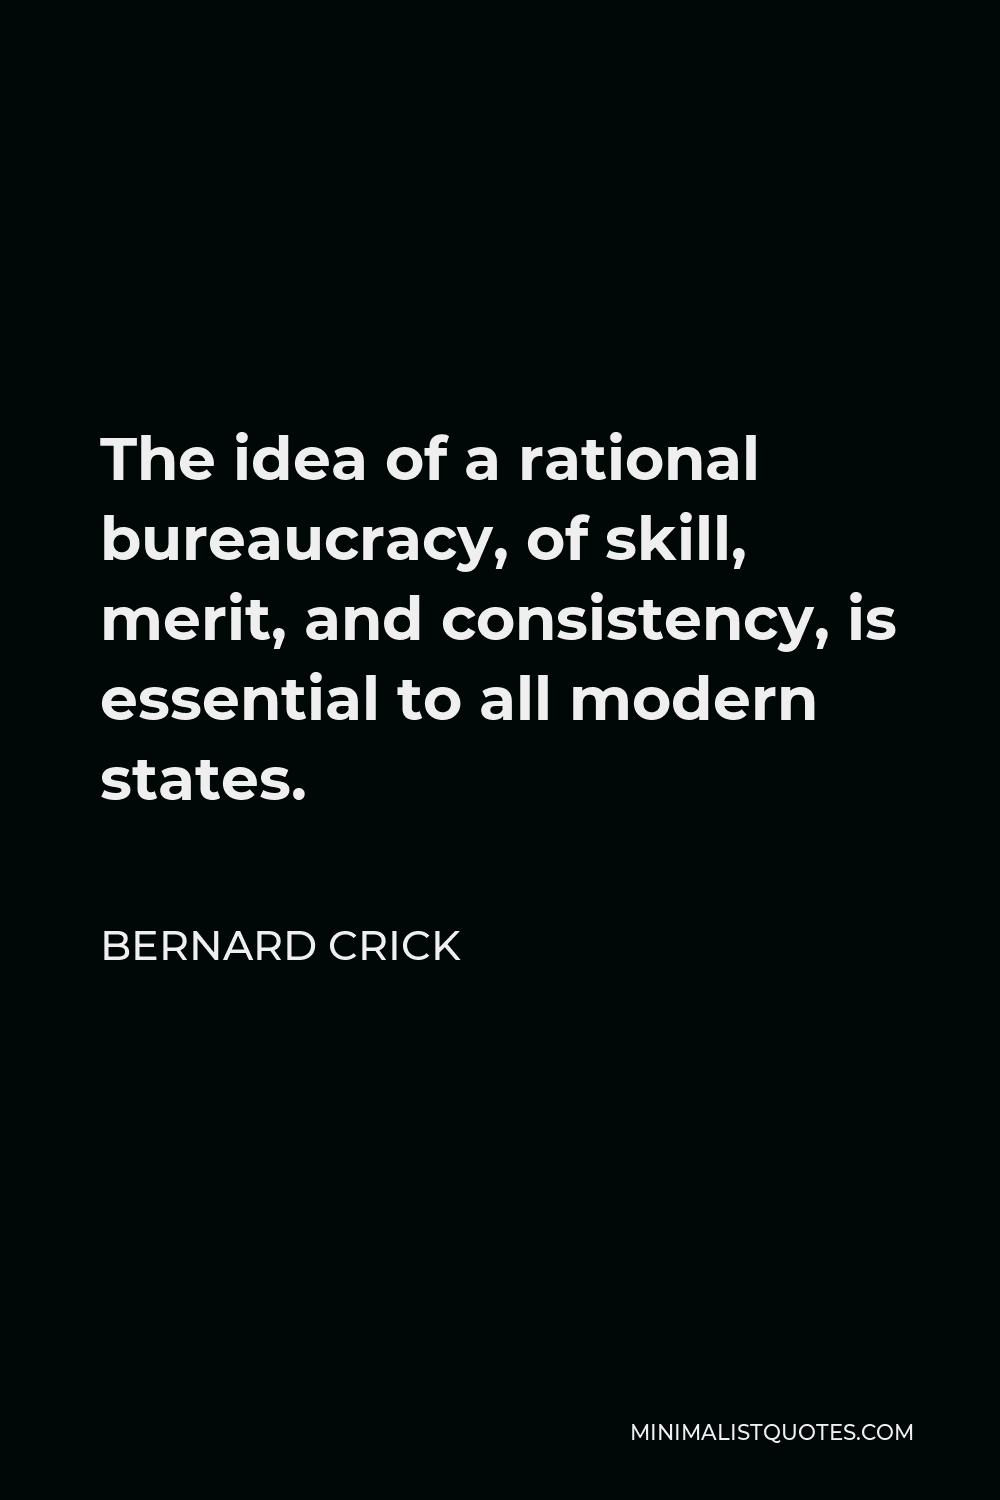 Bernard Crick Quote - The idea of a rational bureaucracy, of skill, merit, and consistency, is essential to all modern states.